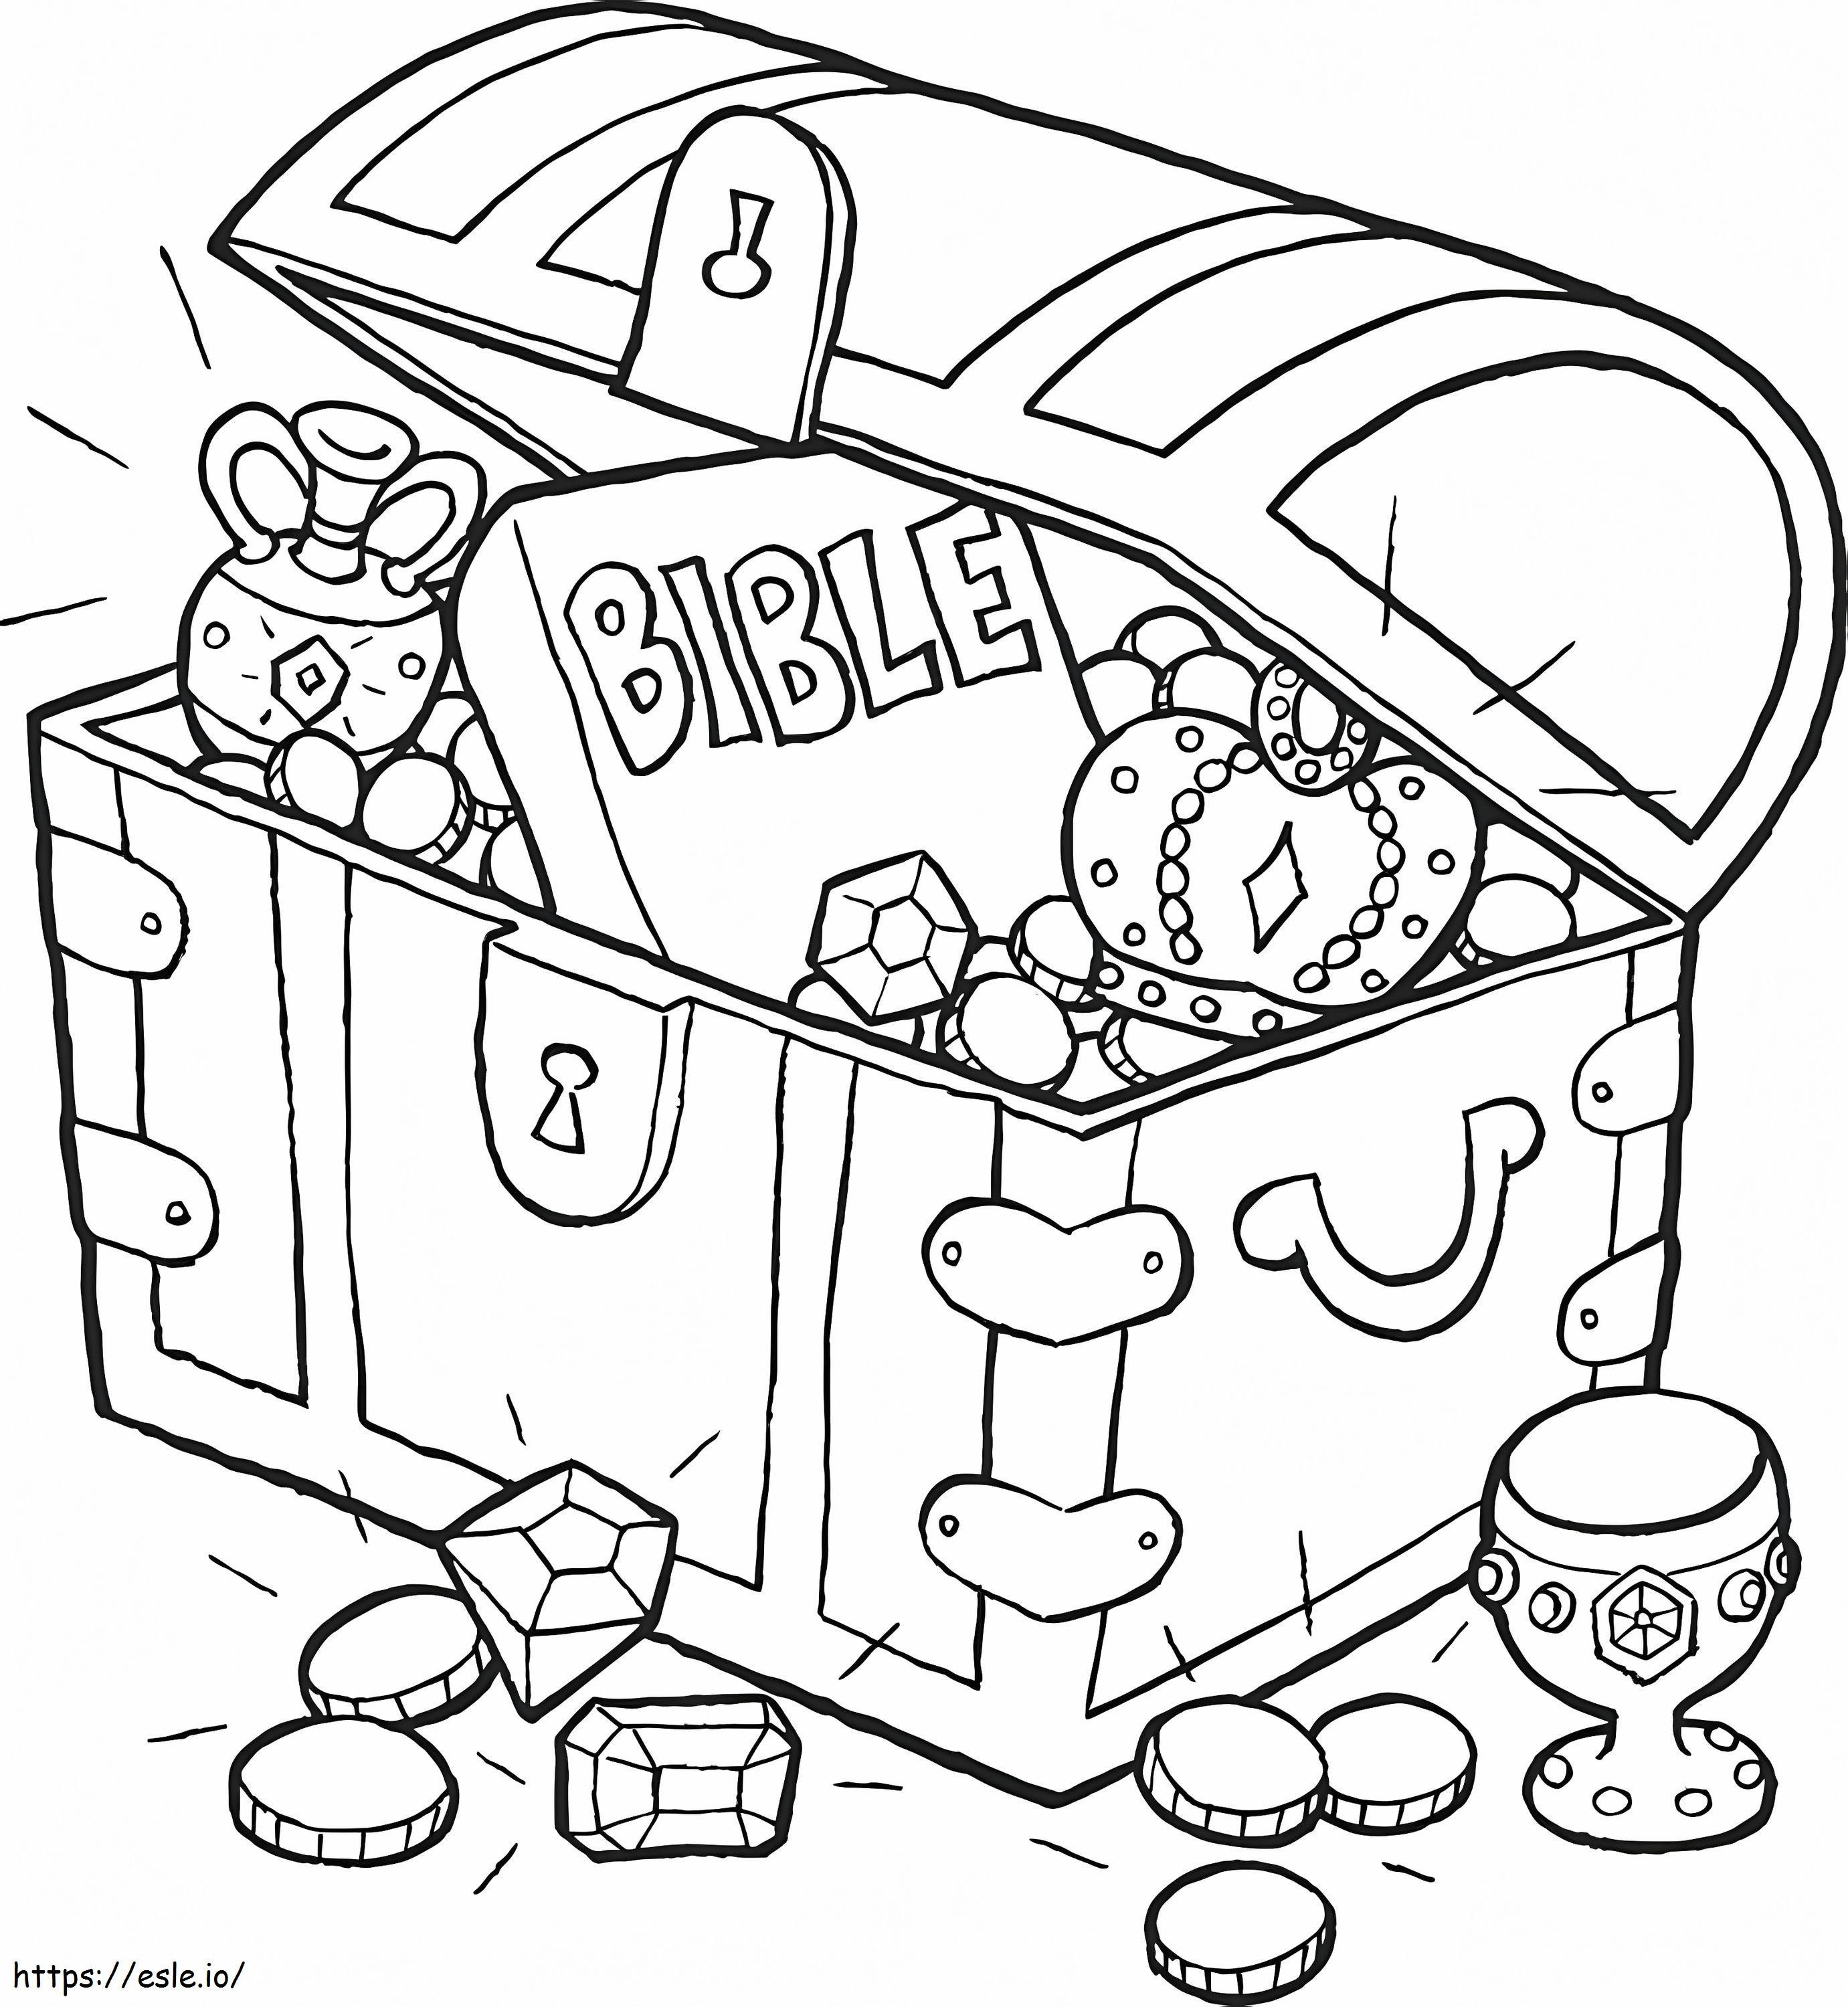 Full Treasure Chest coloring page